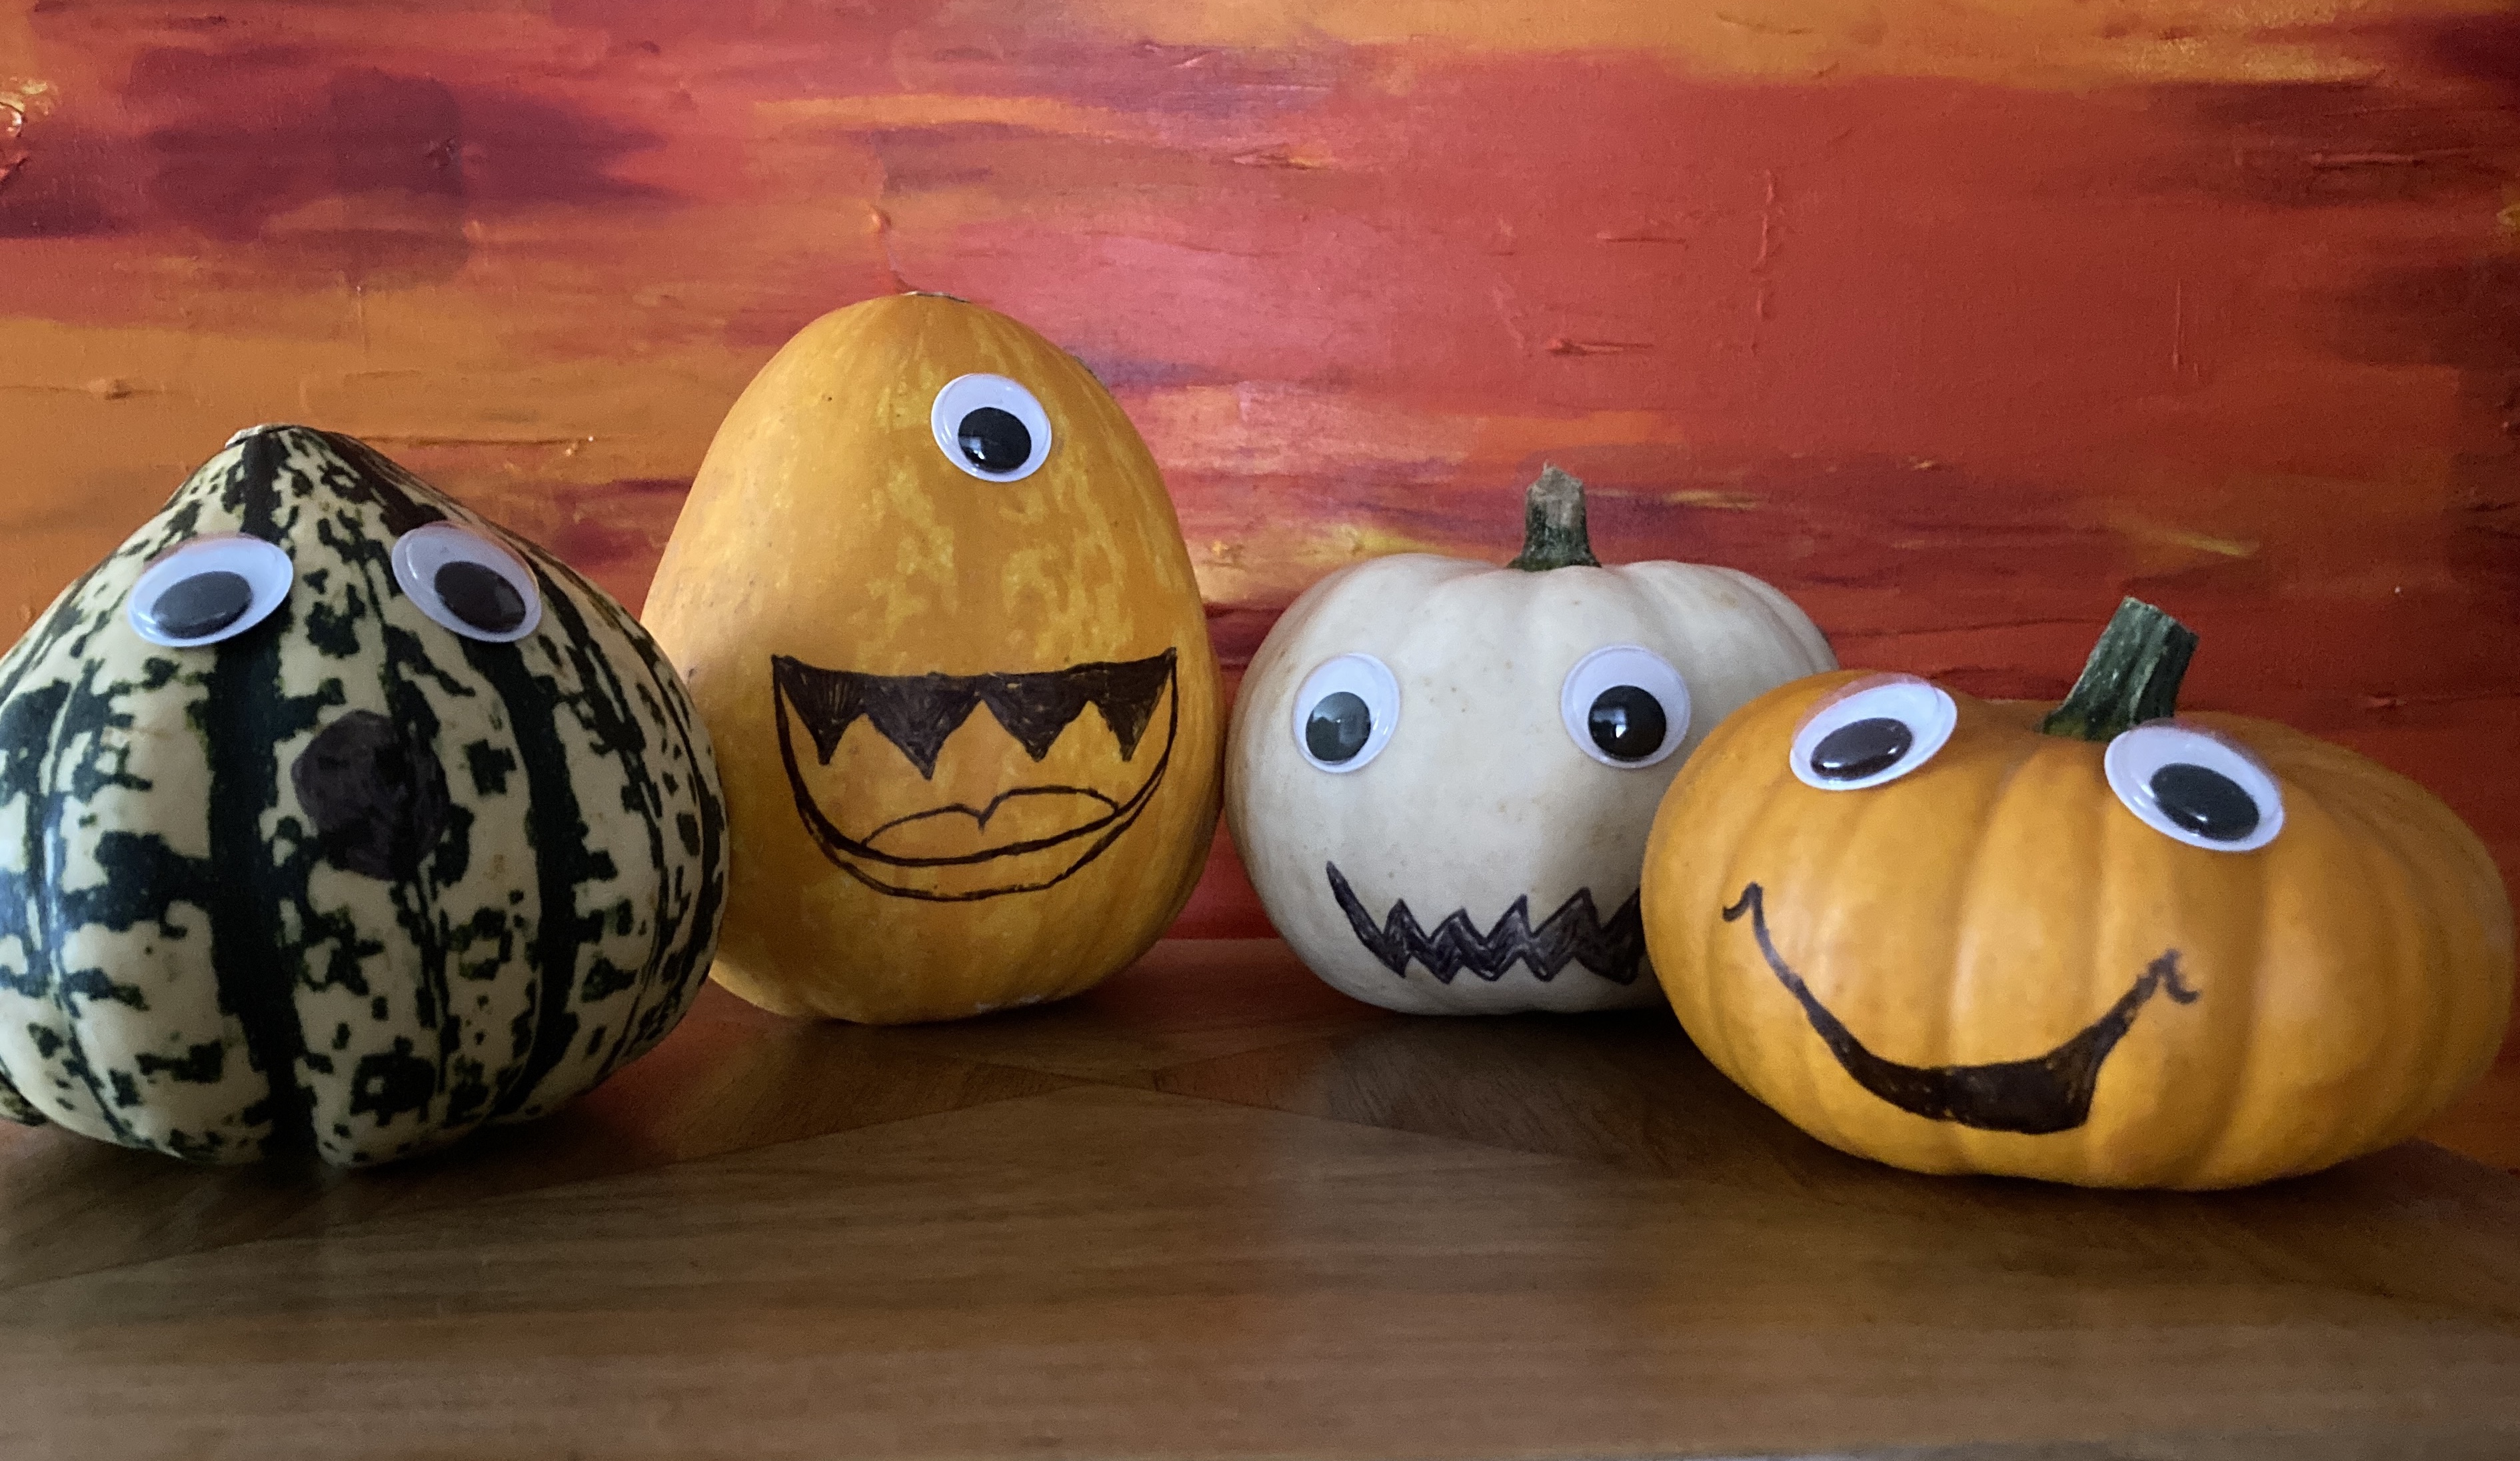 Four small pumpkins of different colours and shapes have googly eyes stuck on and mouths drawn with black pen sit on a wooden cabinet. Behind them is an acrylic painting in shades of orange and red.